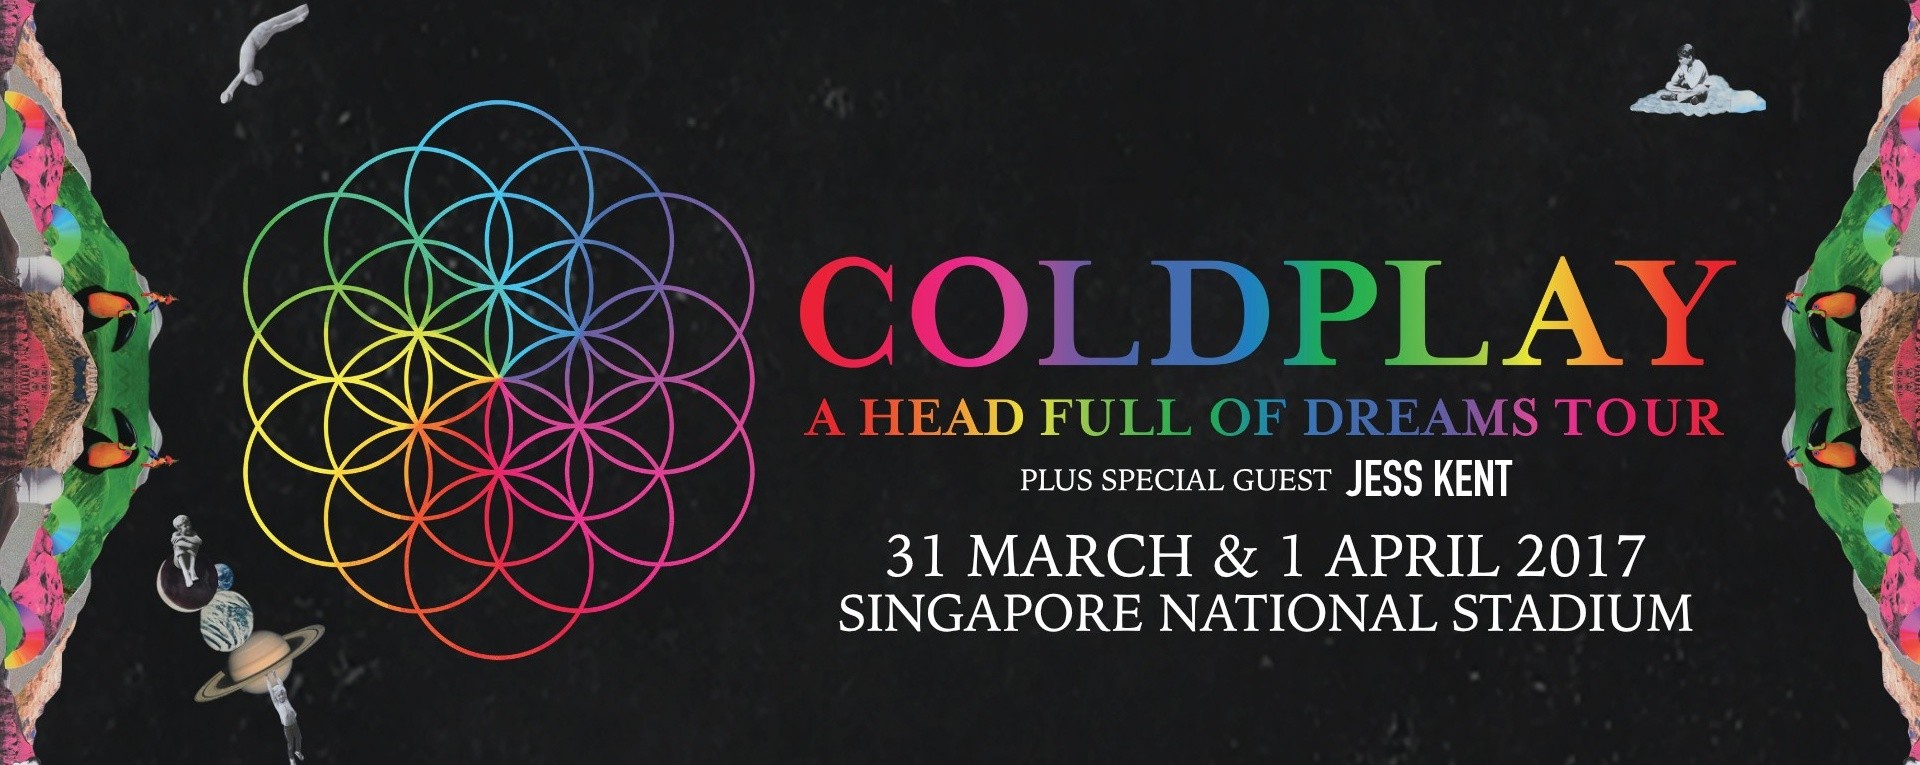 Coldplay - A Head Full of Dreams Tour (Singapore)